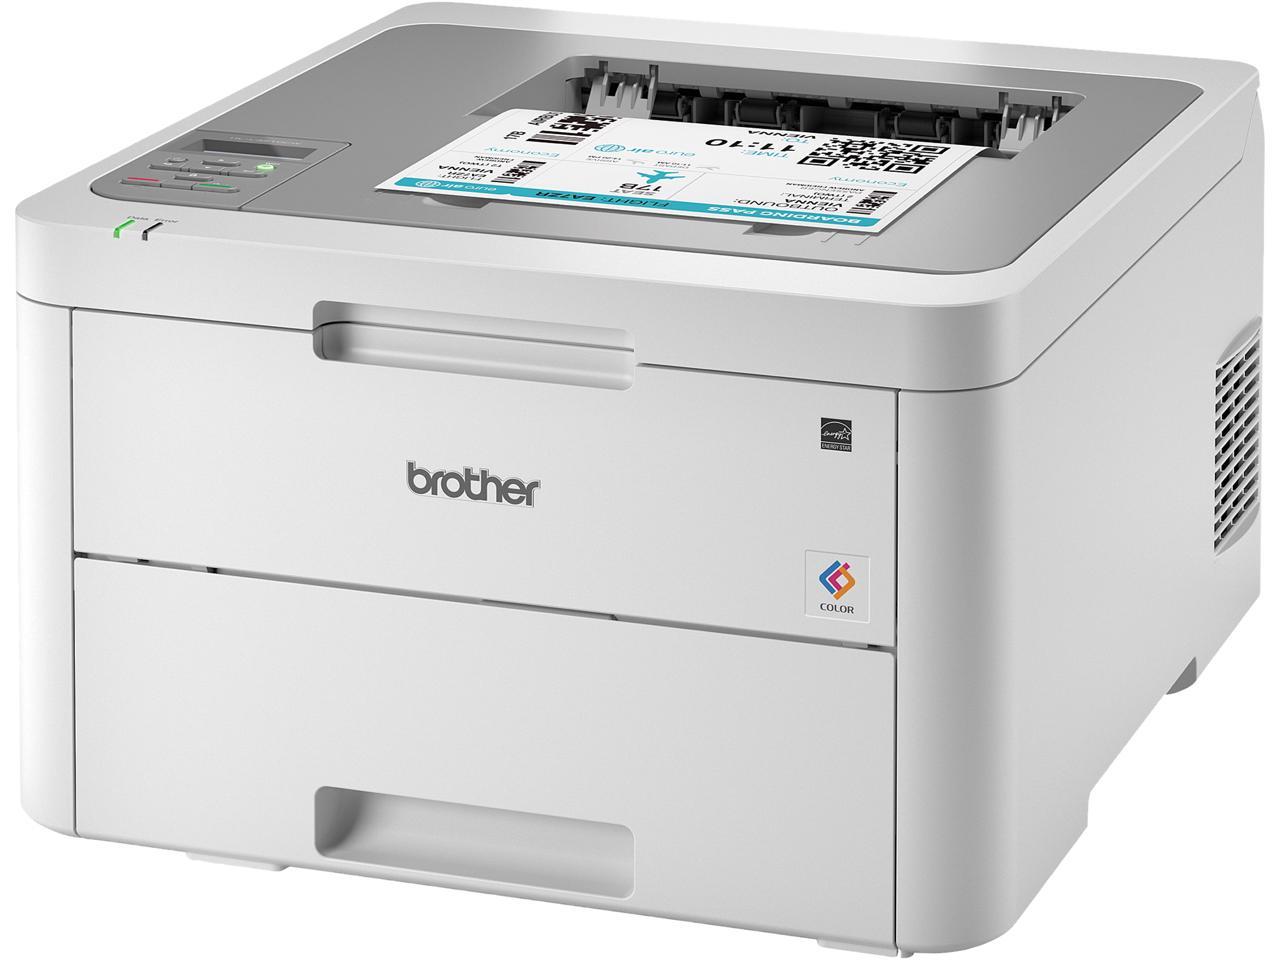 Brother HL-L3210CW Wireless Compact Digital Color Printer Providing Laser Printer Quality Results